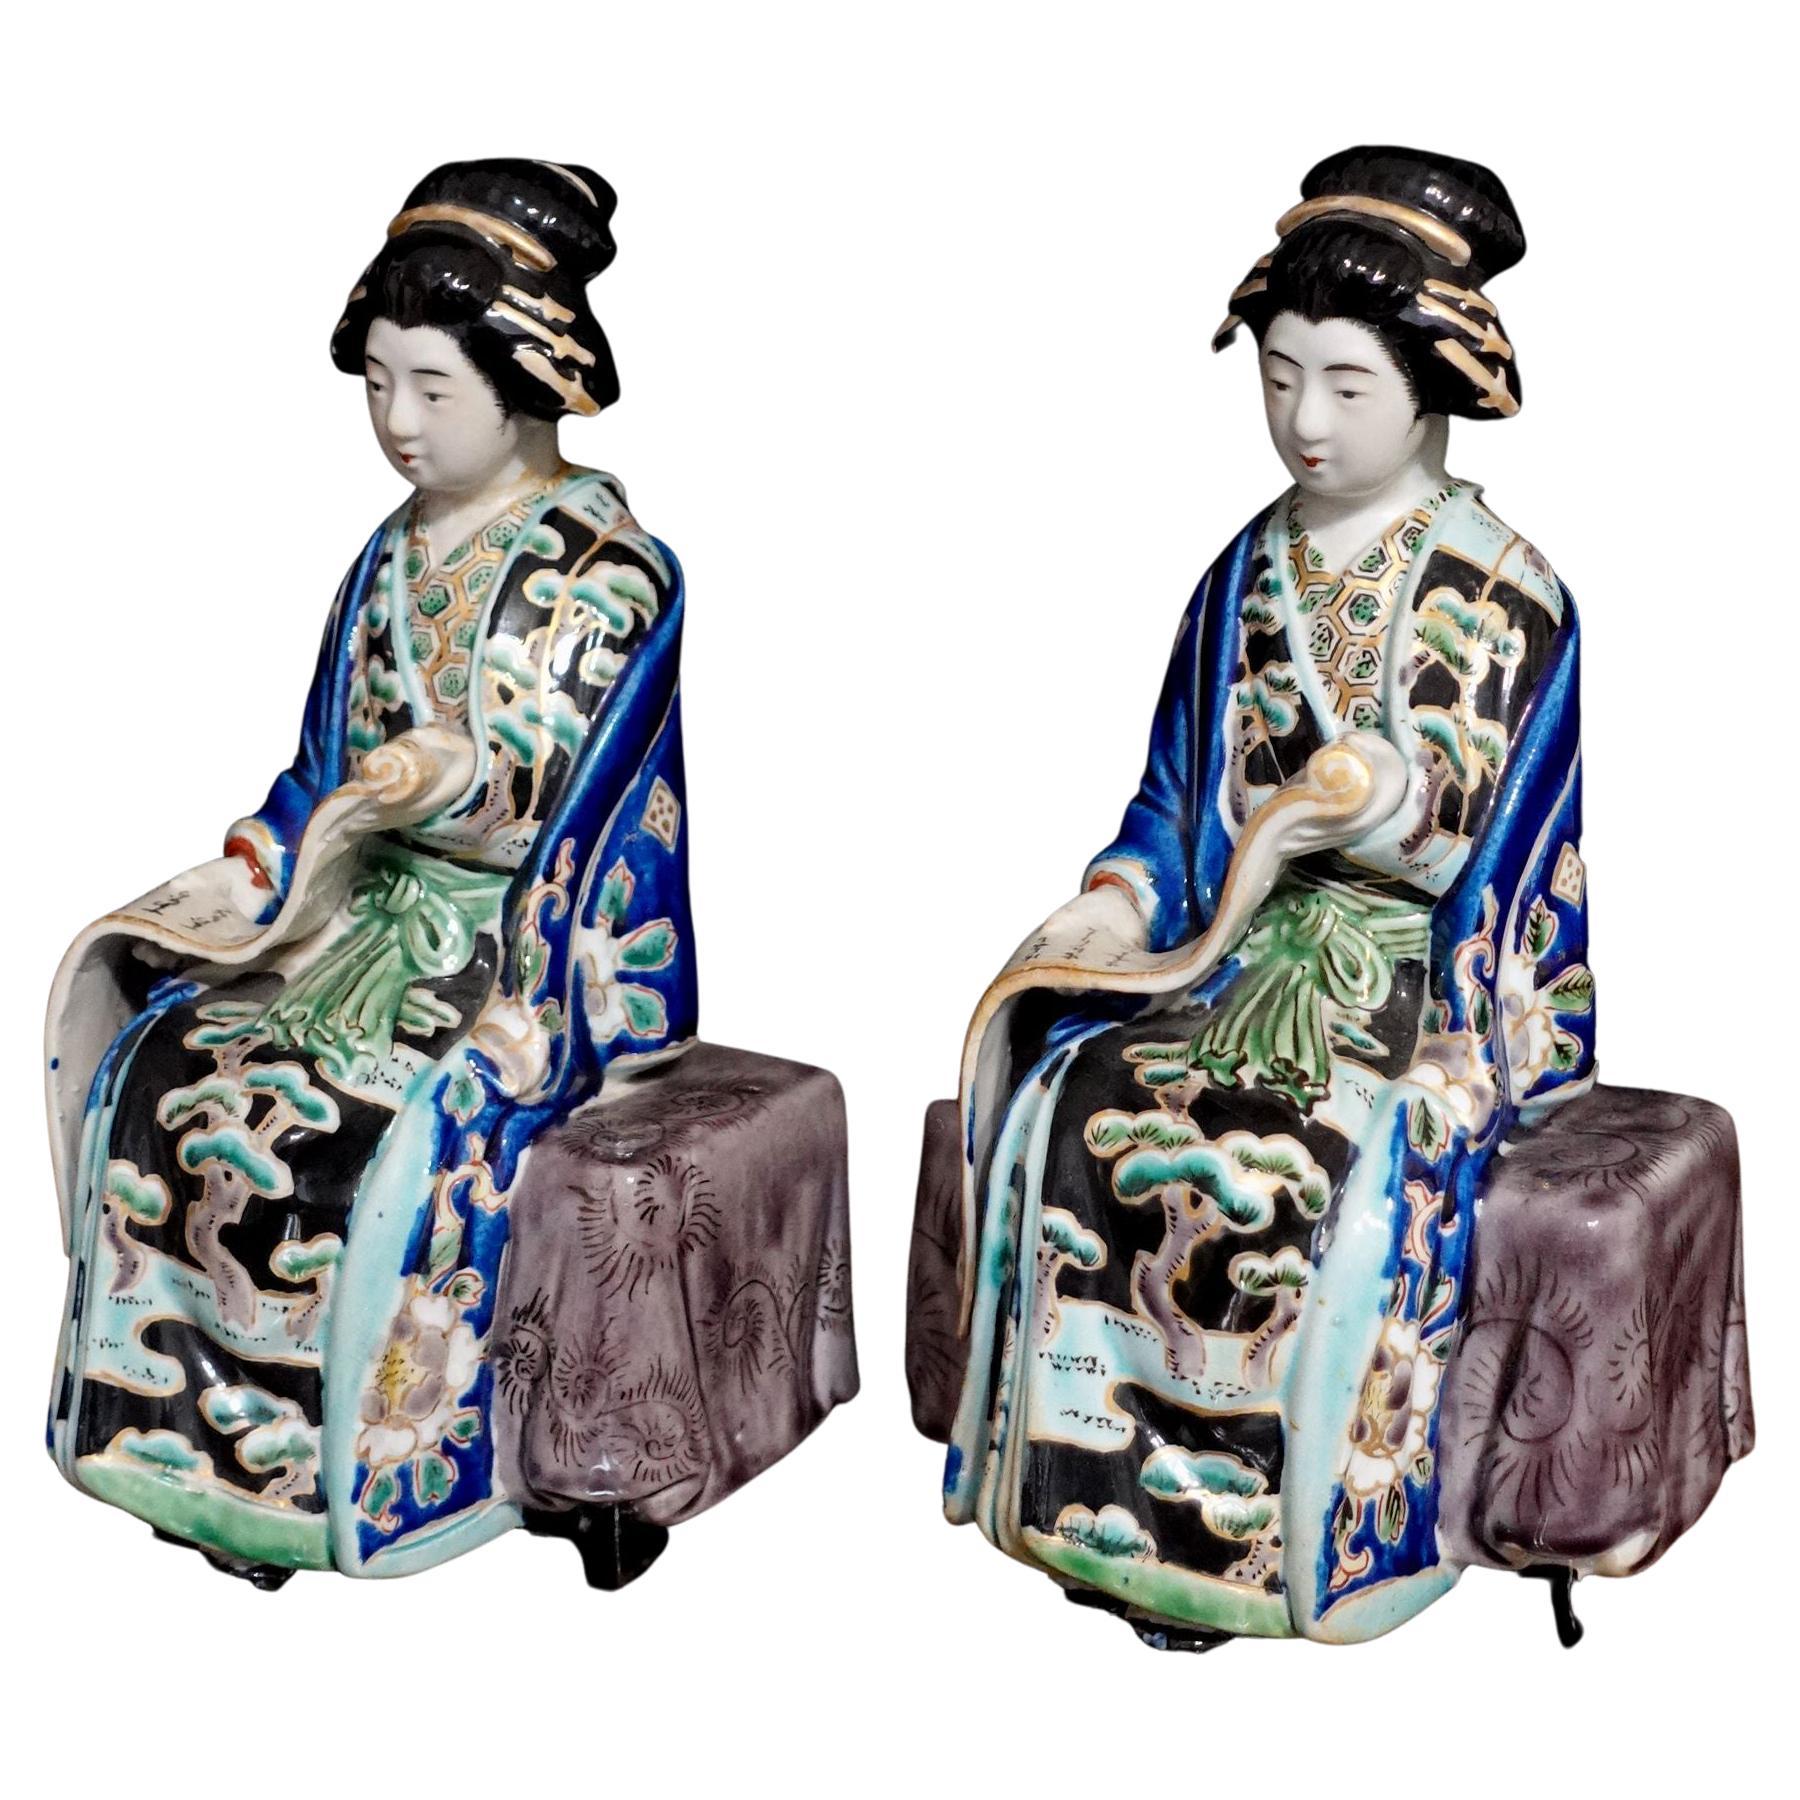 A beautiful and well-made Pair of Vantage pair of Japanese Geisha statues. They are reading the scrolls of calligraphy holding on their hands.
They can be used for display or the book ends. 
They are old but still in the new condition in the